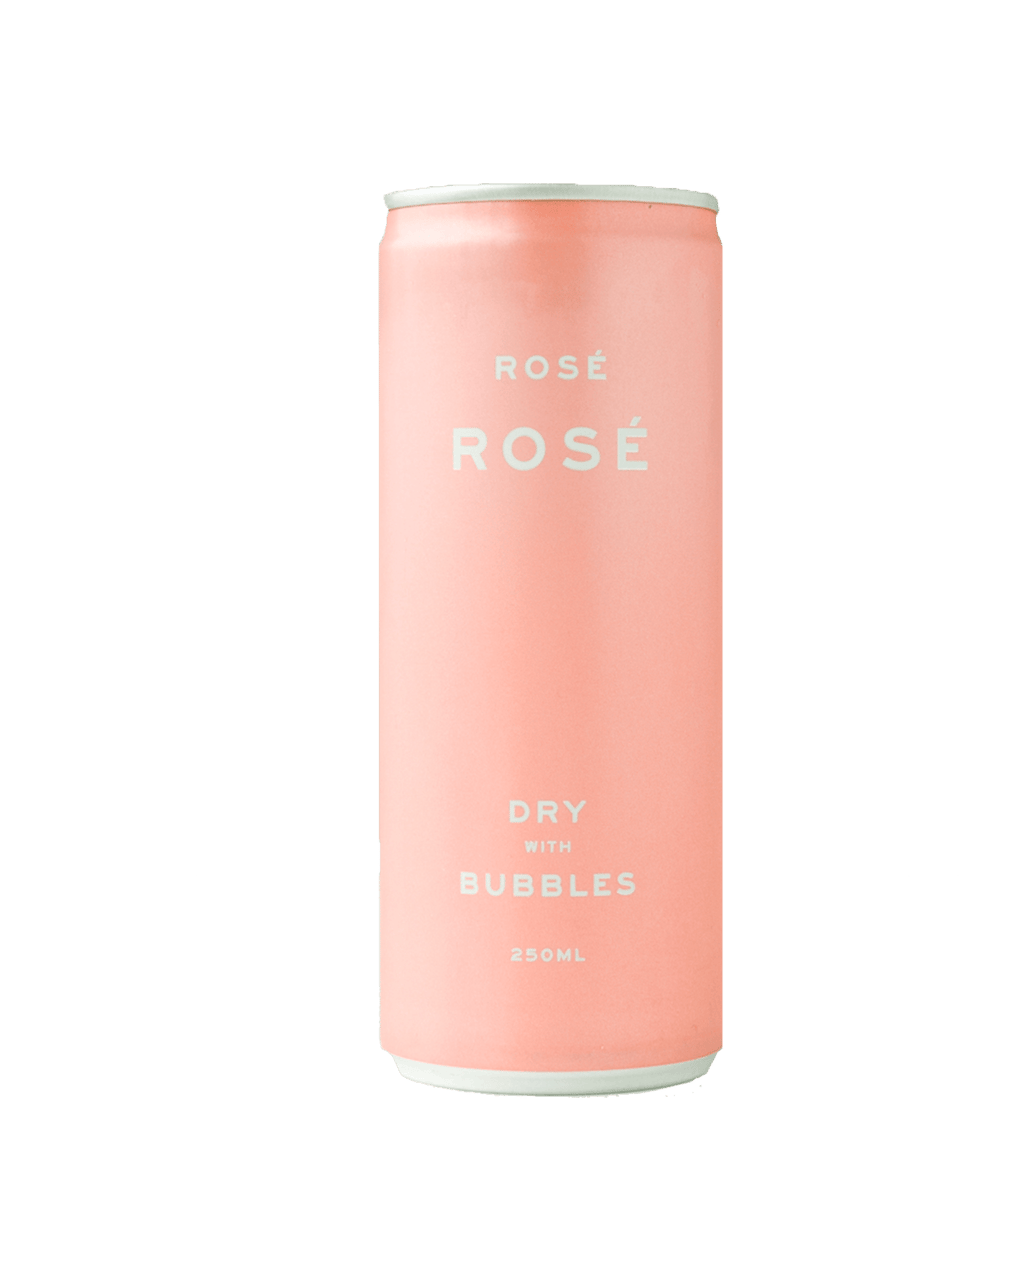 Rose Rose Dry With Bubbles 250ml Unbeatable Prices Buy Online Best